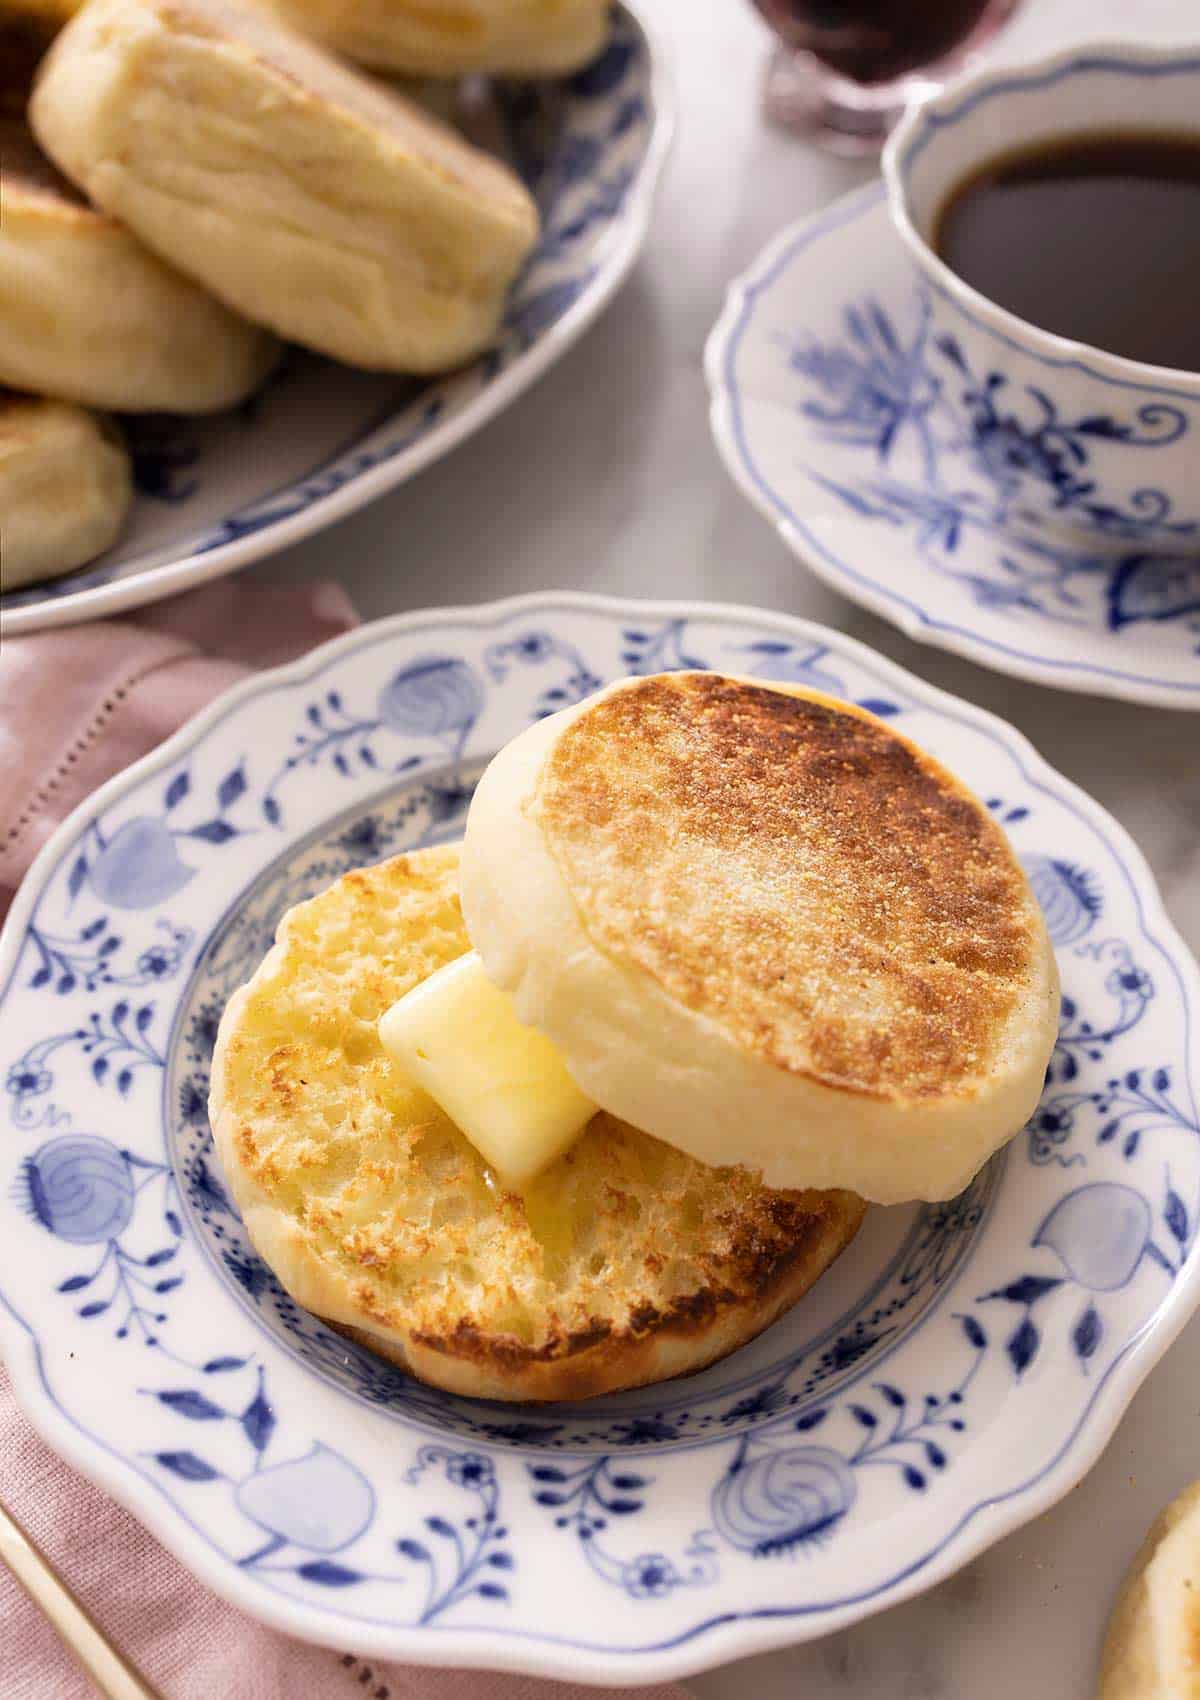 An English muffin cut in half and spread with butter on a plate